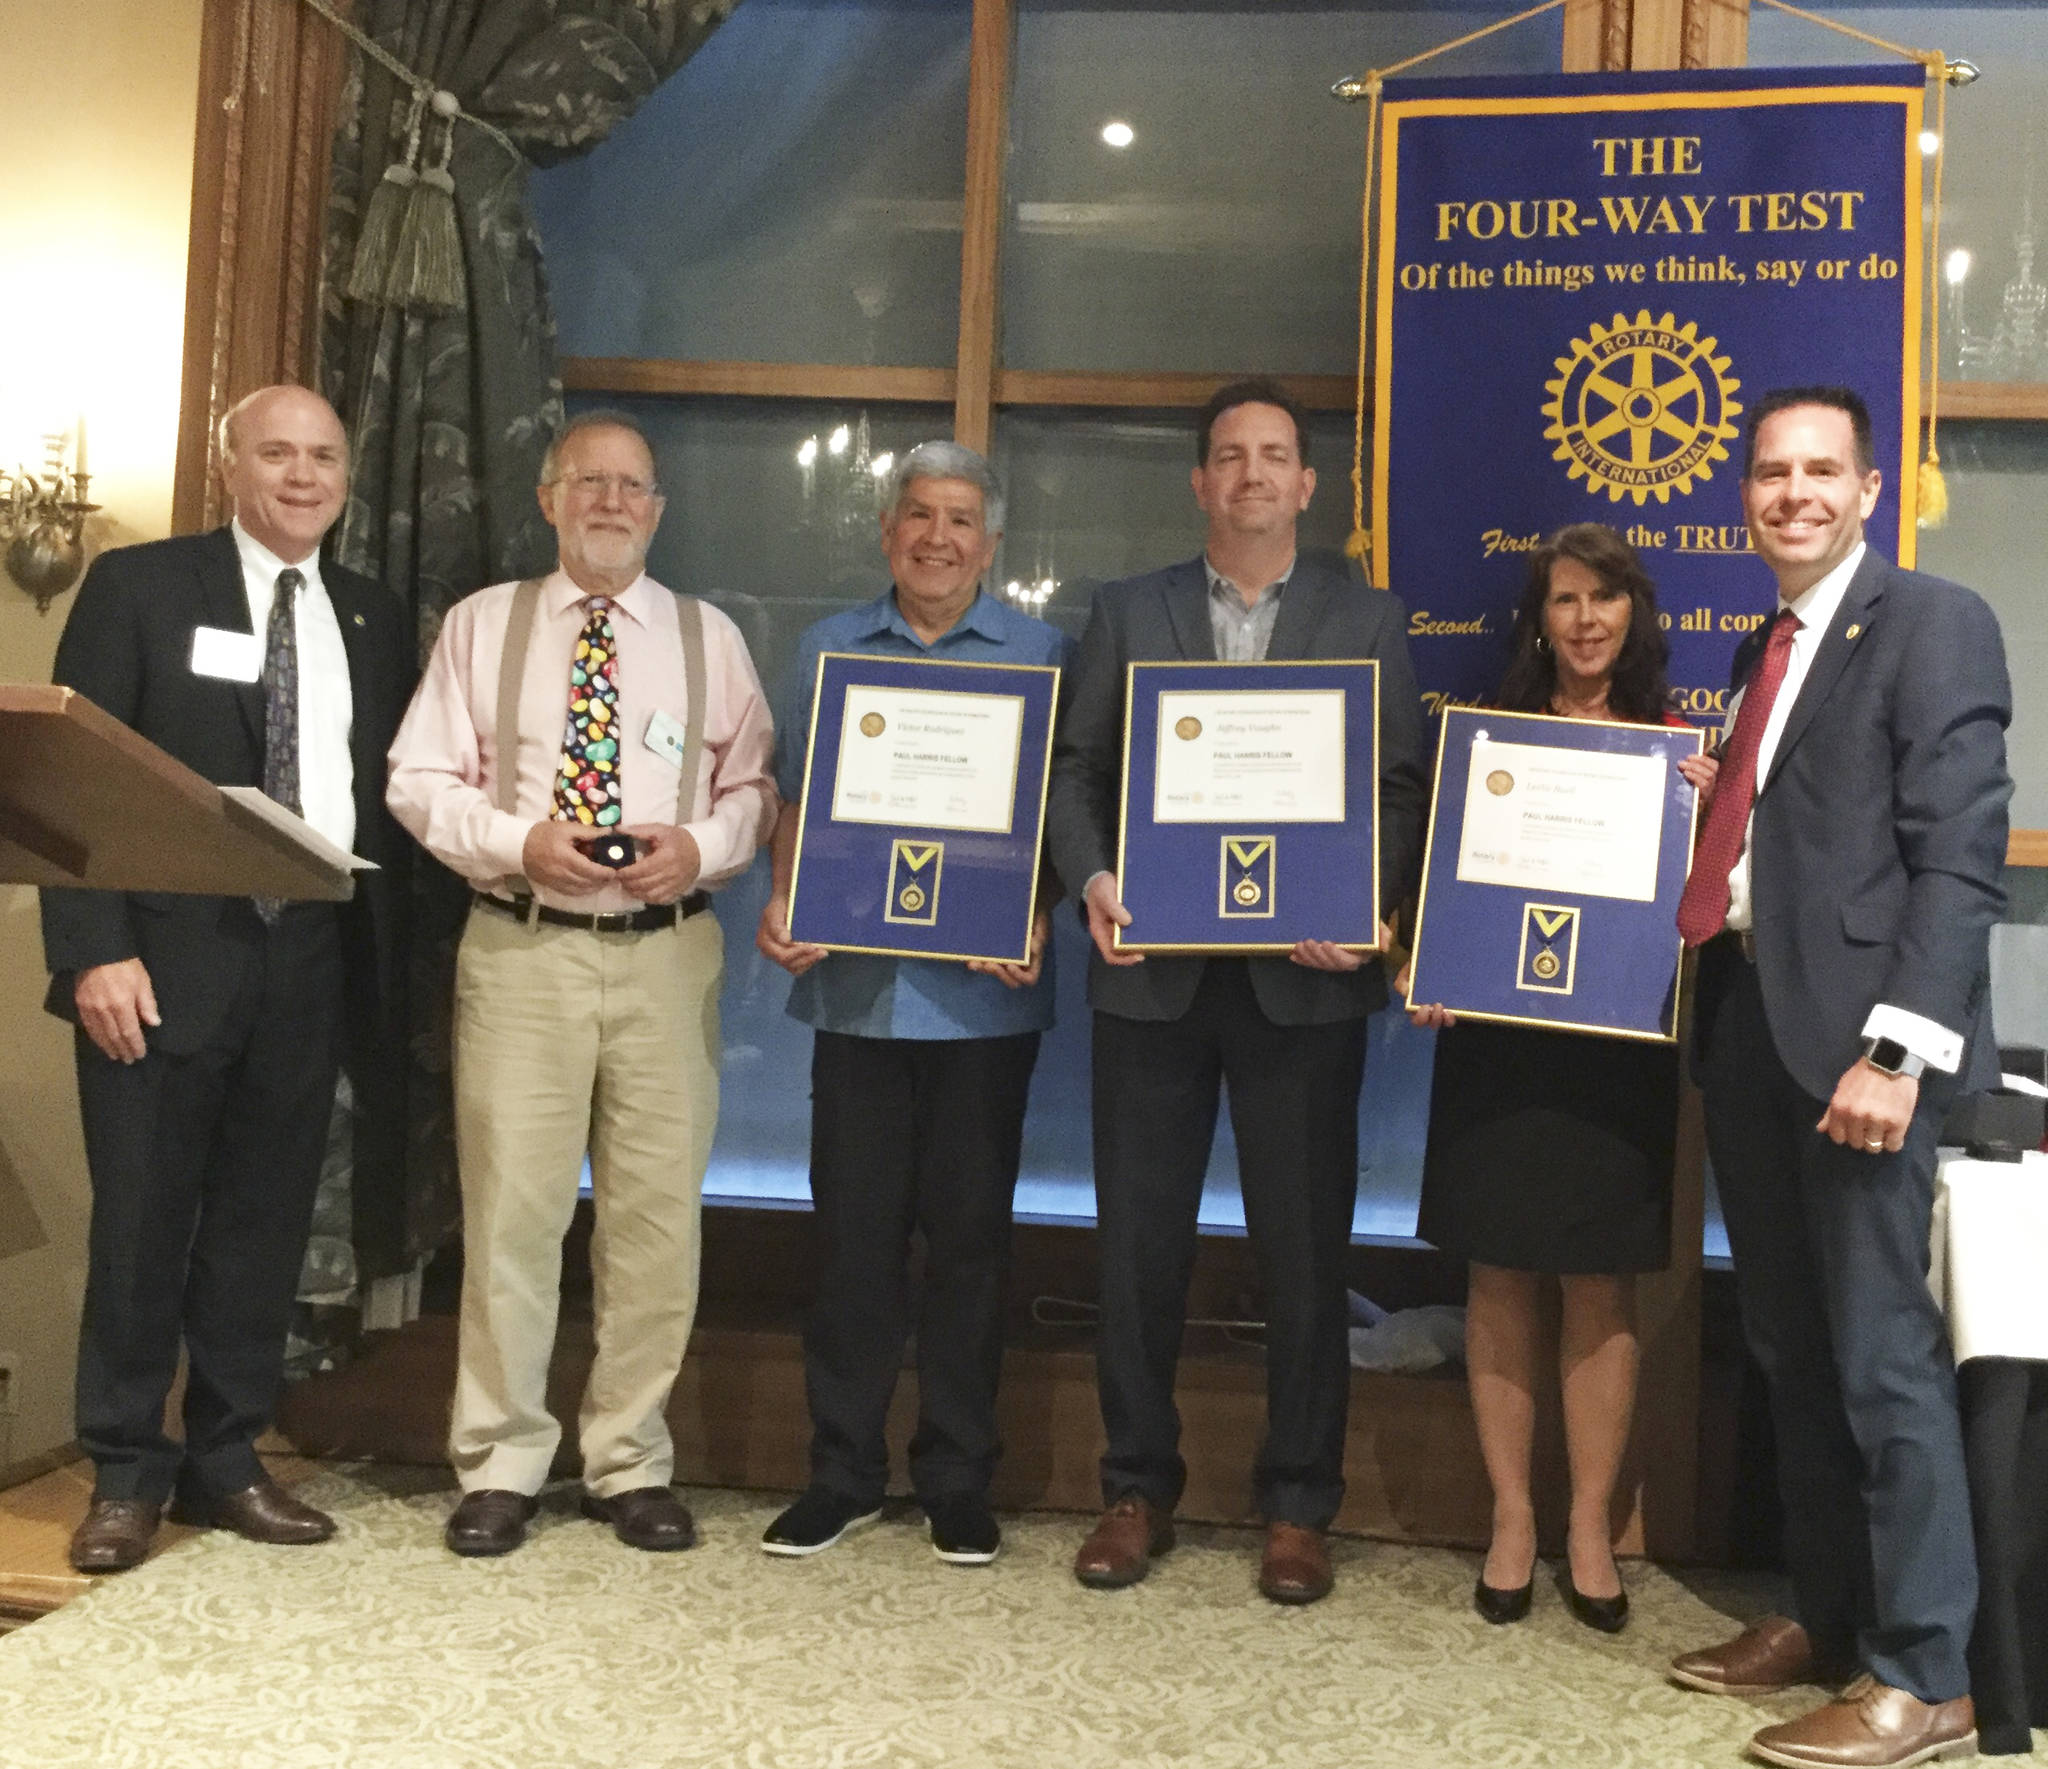 Marysville Rotary Club presents Paul Harris Fellow awards to three for outstanding volunteer service